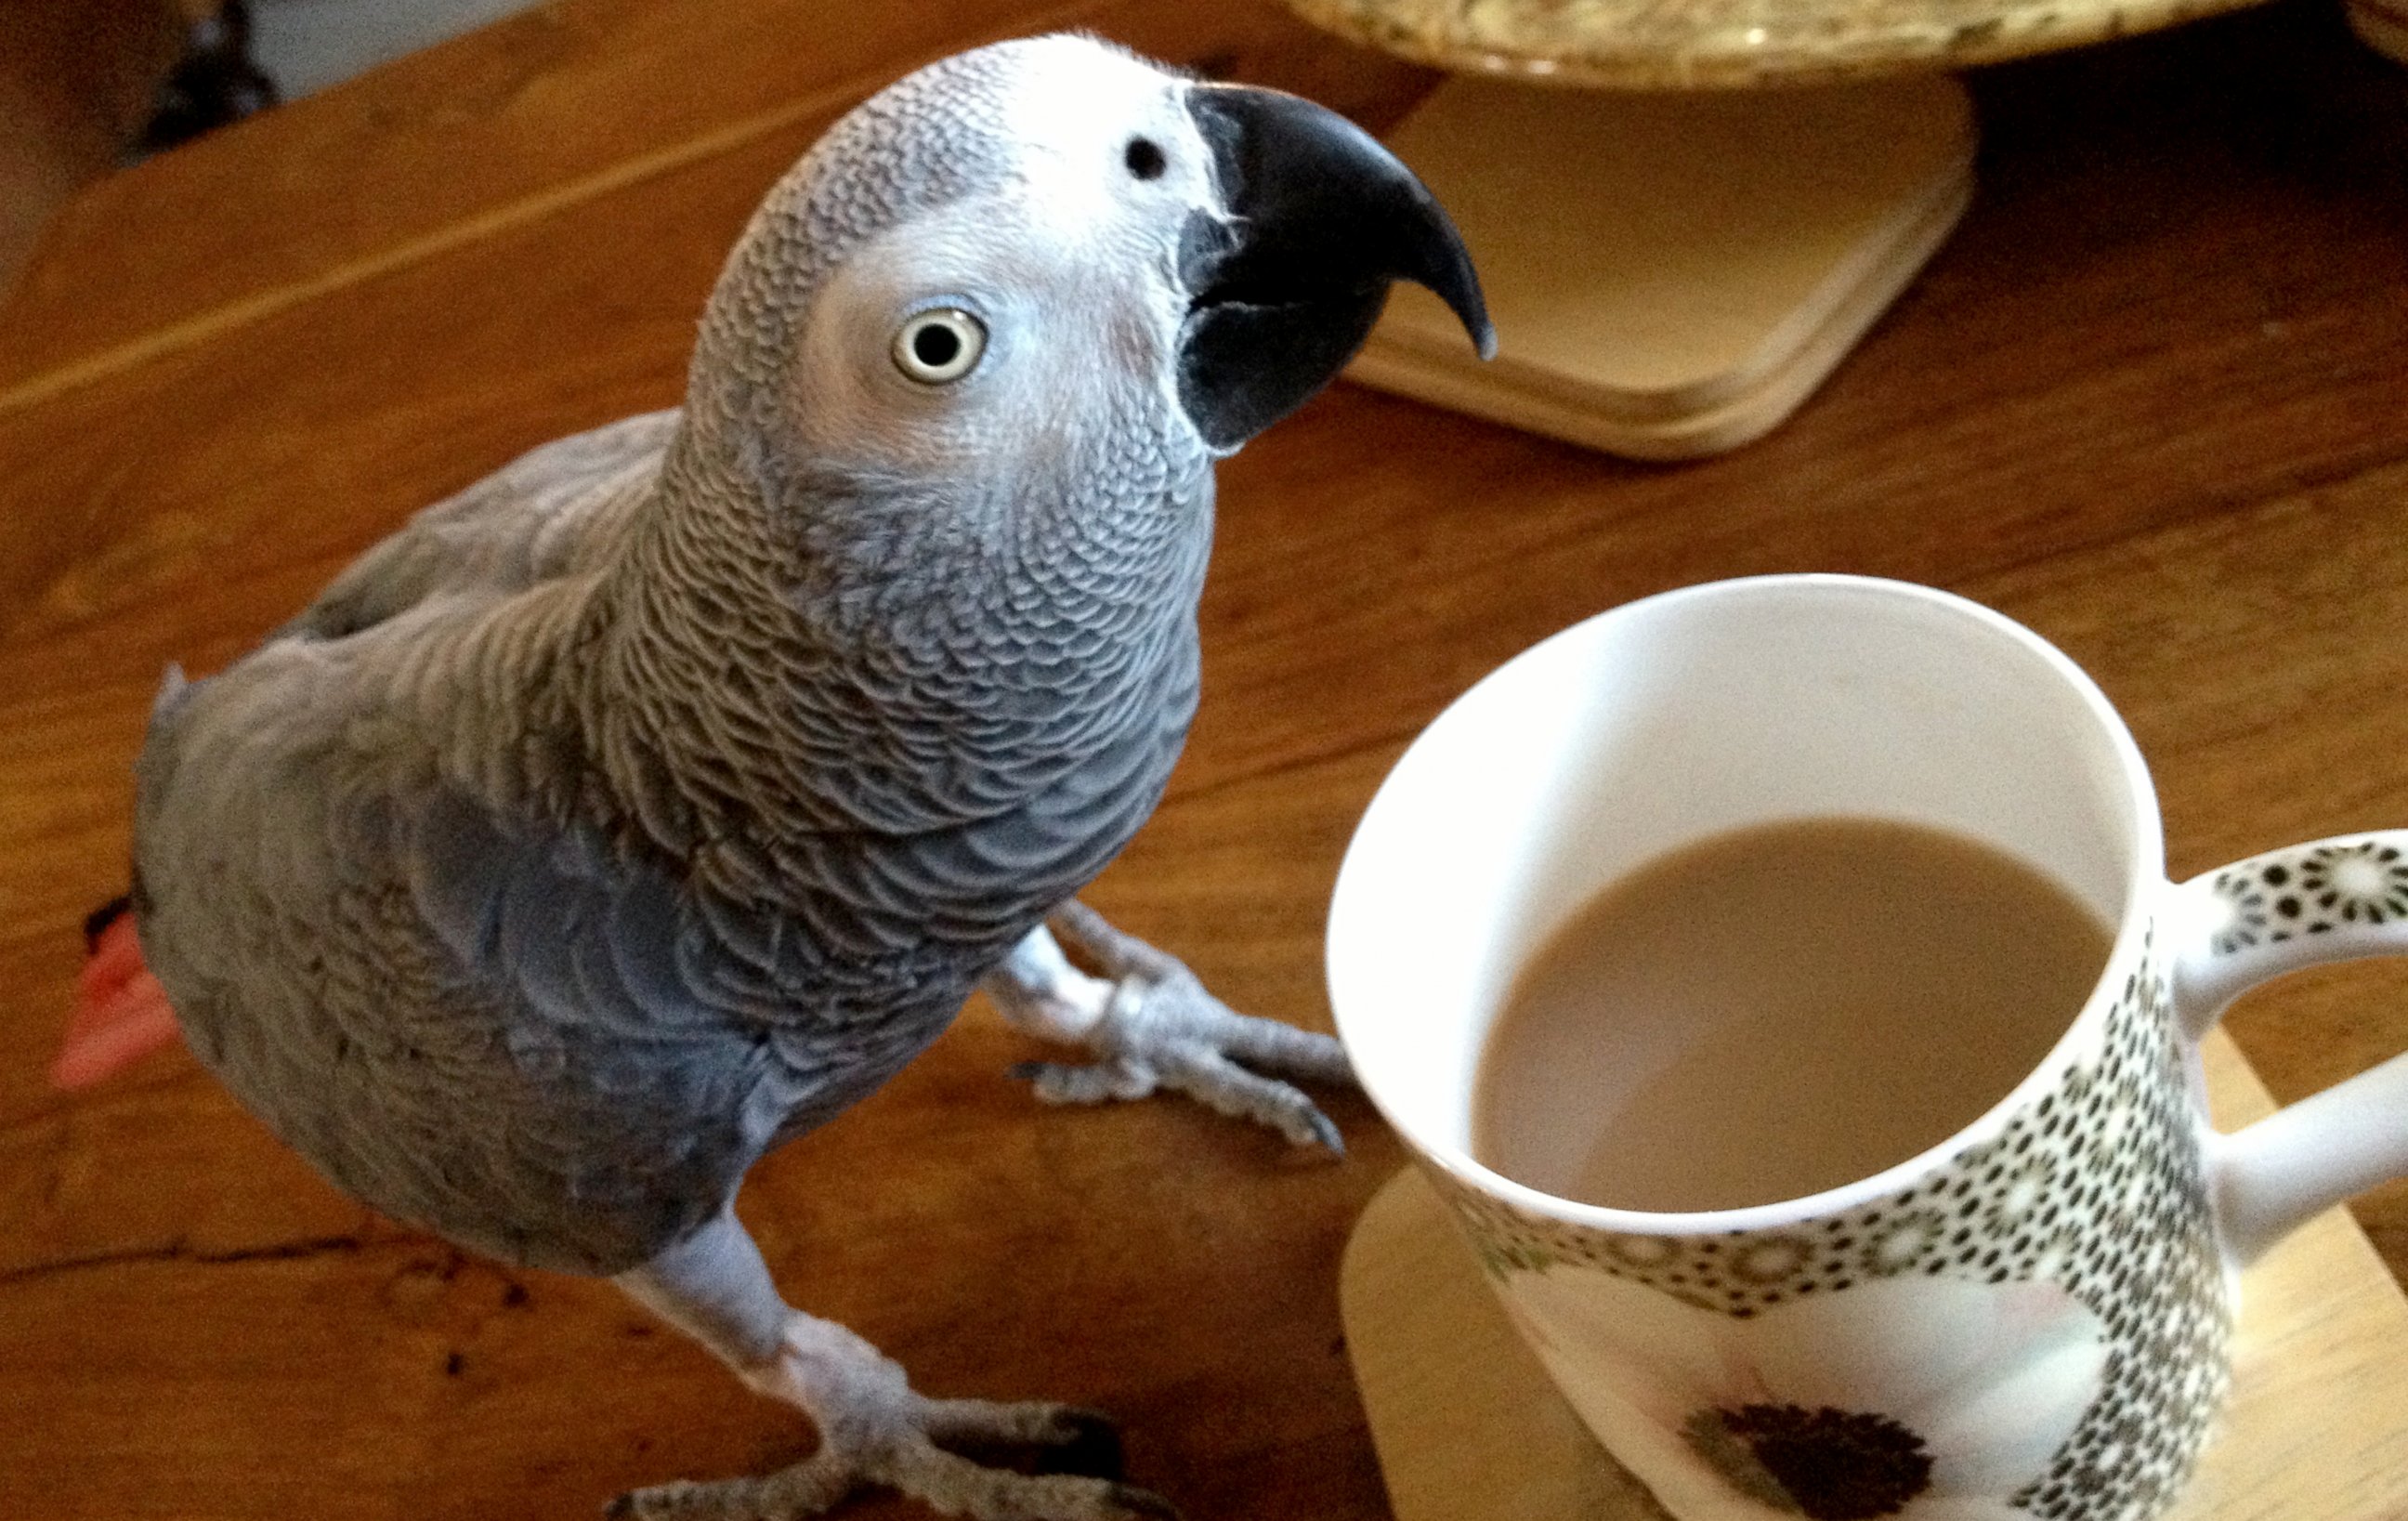 PHOTO: JoeJoe the parrot has been missing for 4 weeks now. 